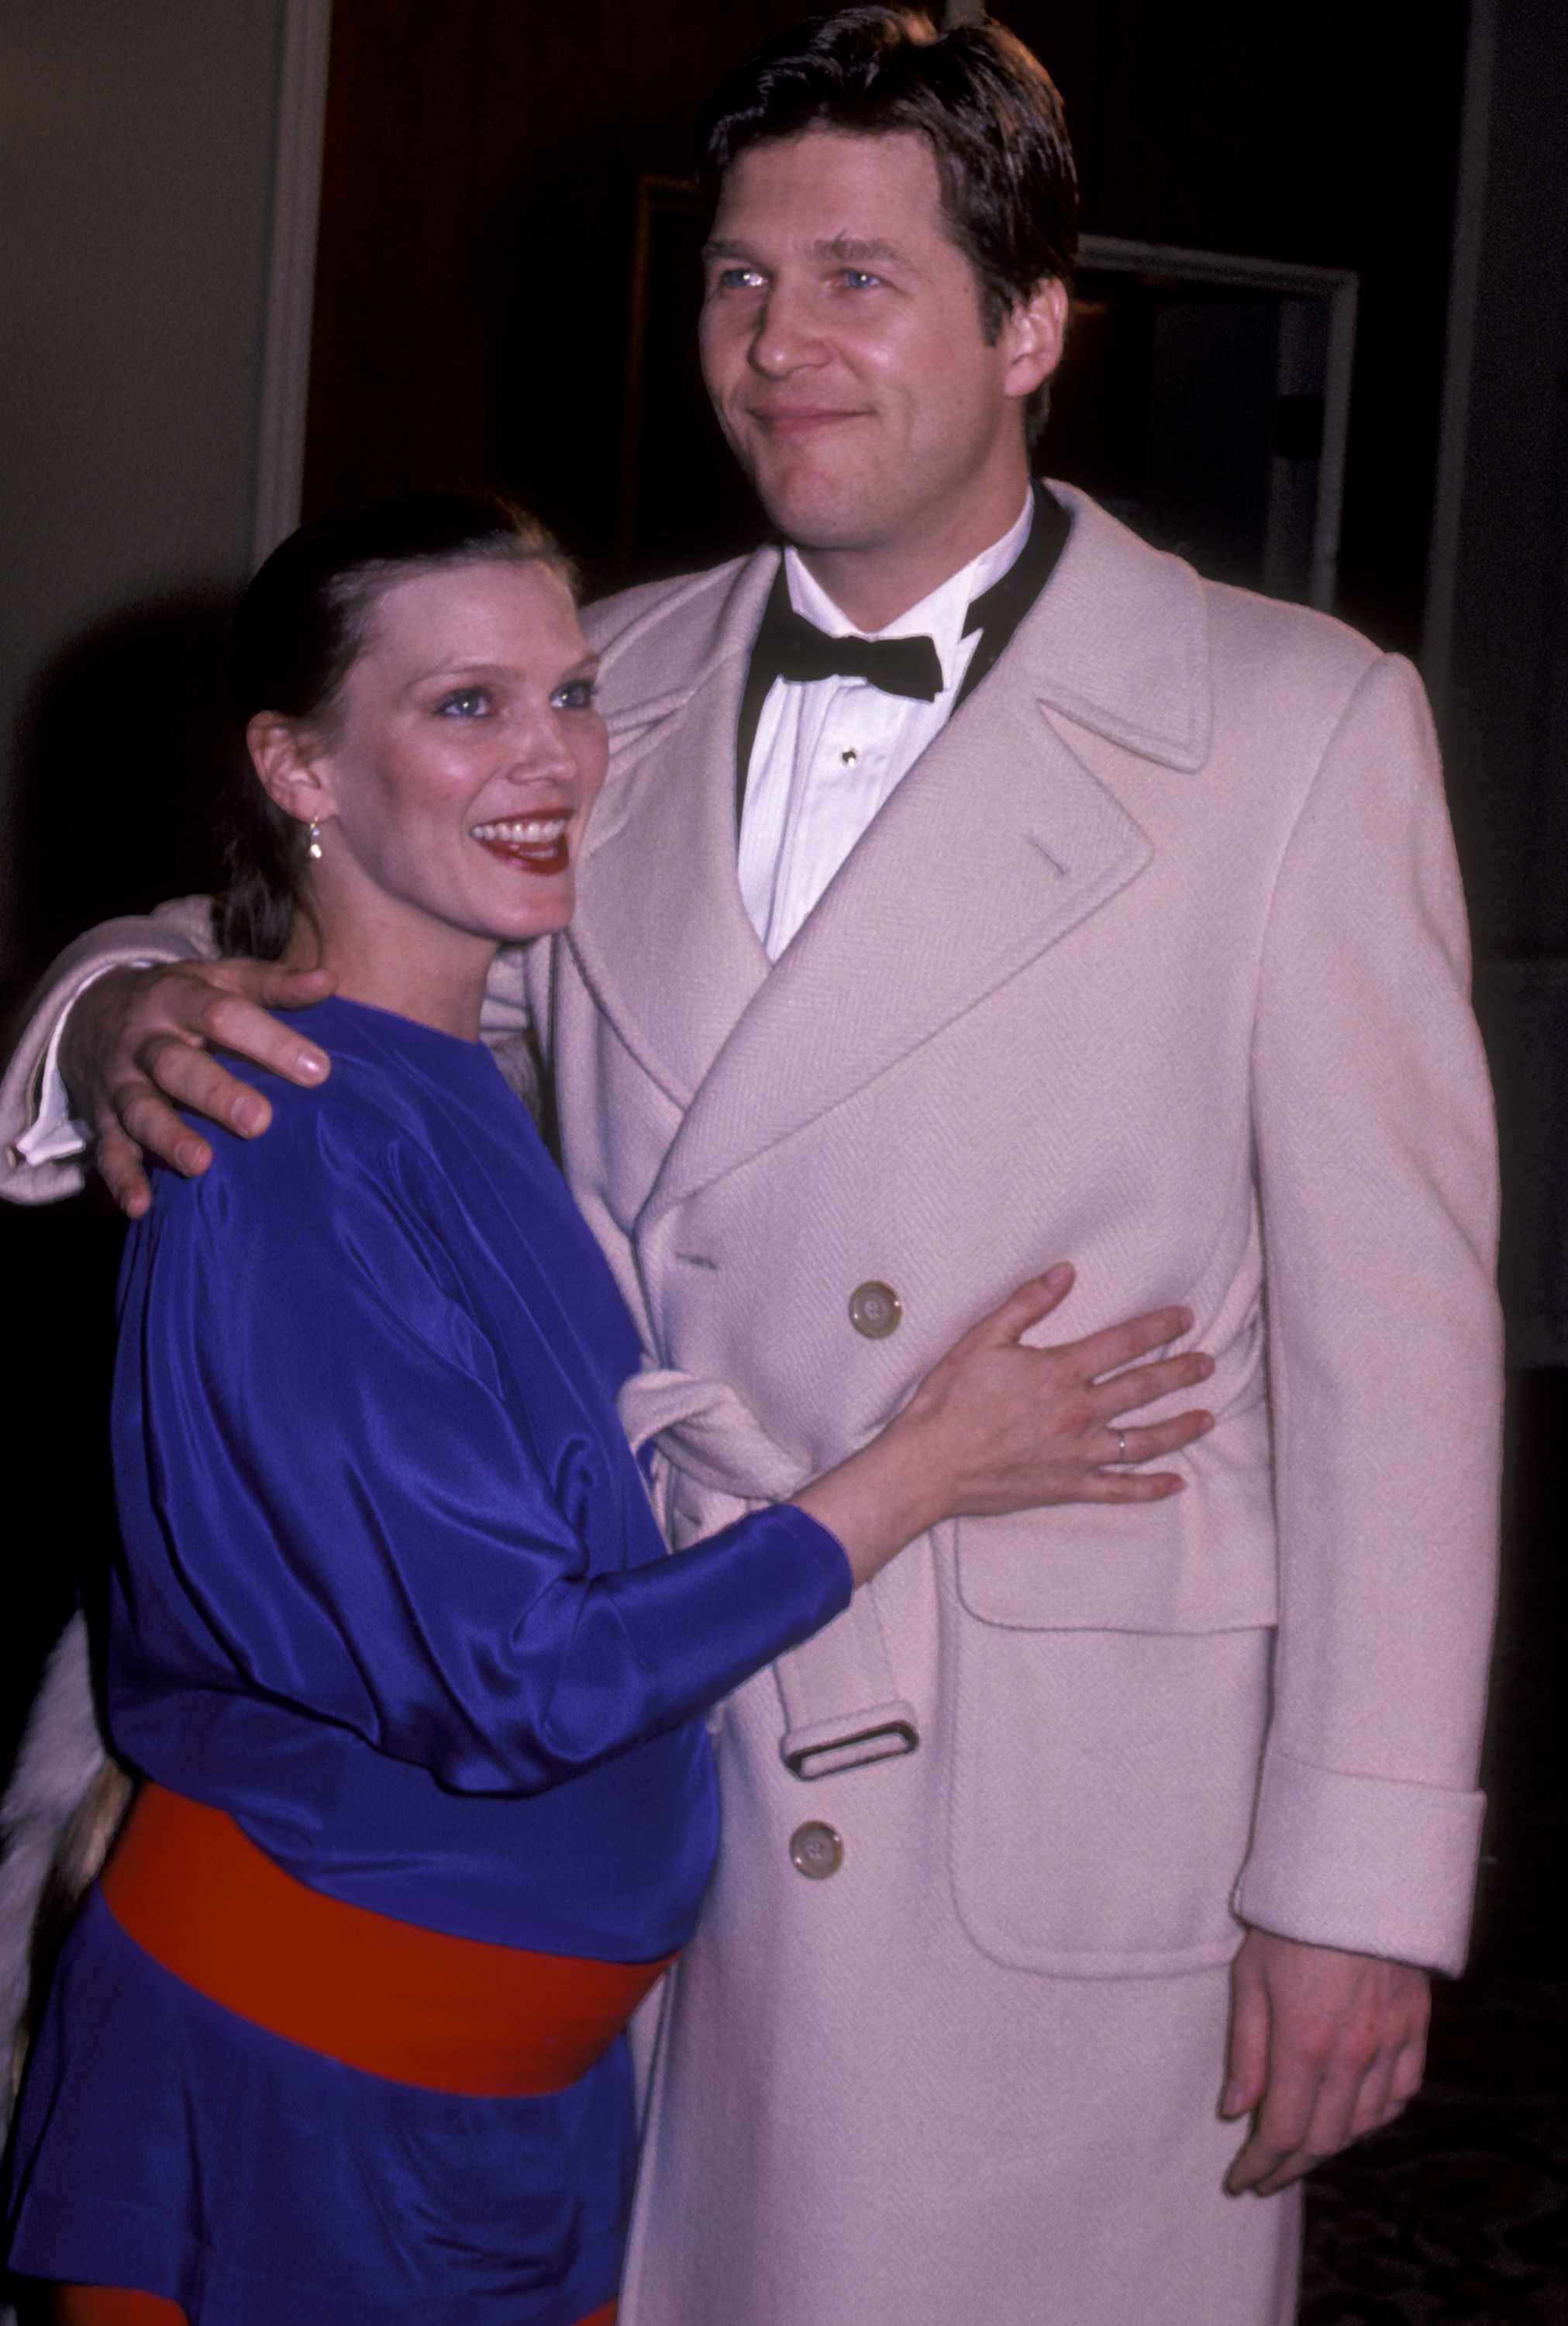 Jeff and Susan Bridges at the 11th Annual American Film Institute Lifetime Achievement Awards Honoring Lillian Gish in Beverly Hills, California on March 3, 1983. | Source: Getty Images